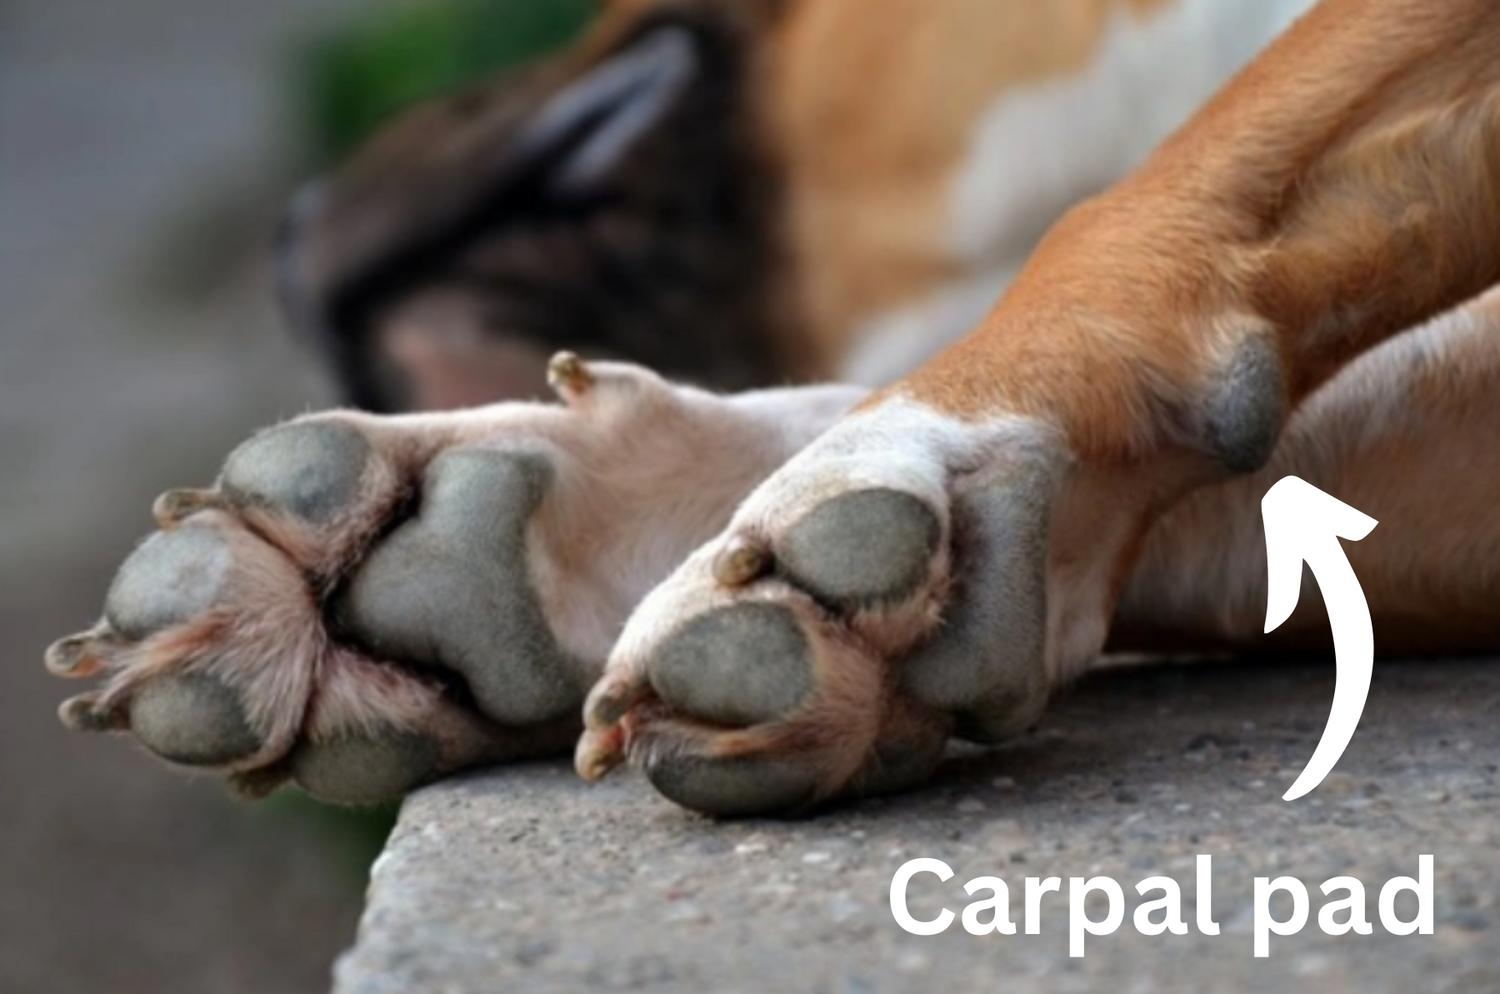 What are Carpal Pad Injuries?